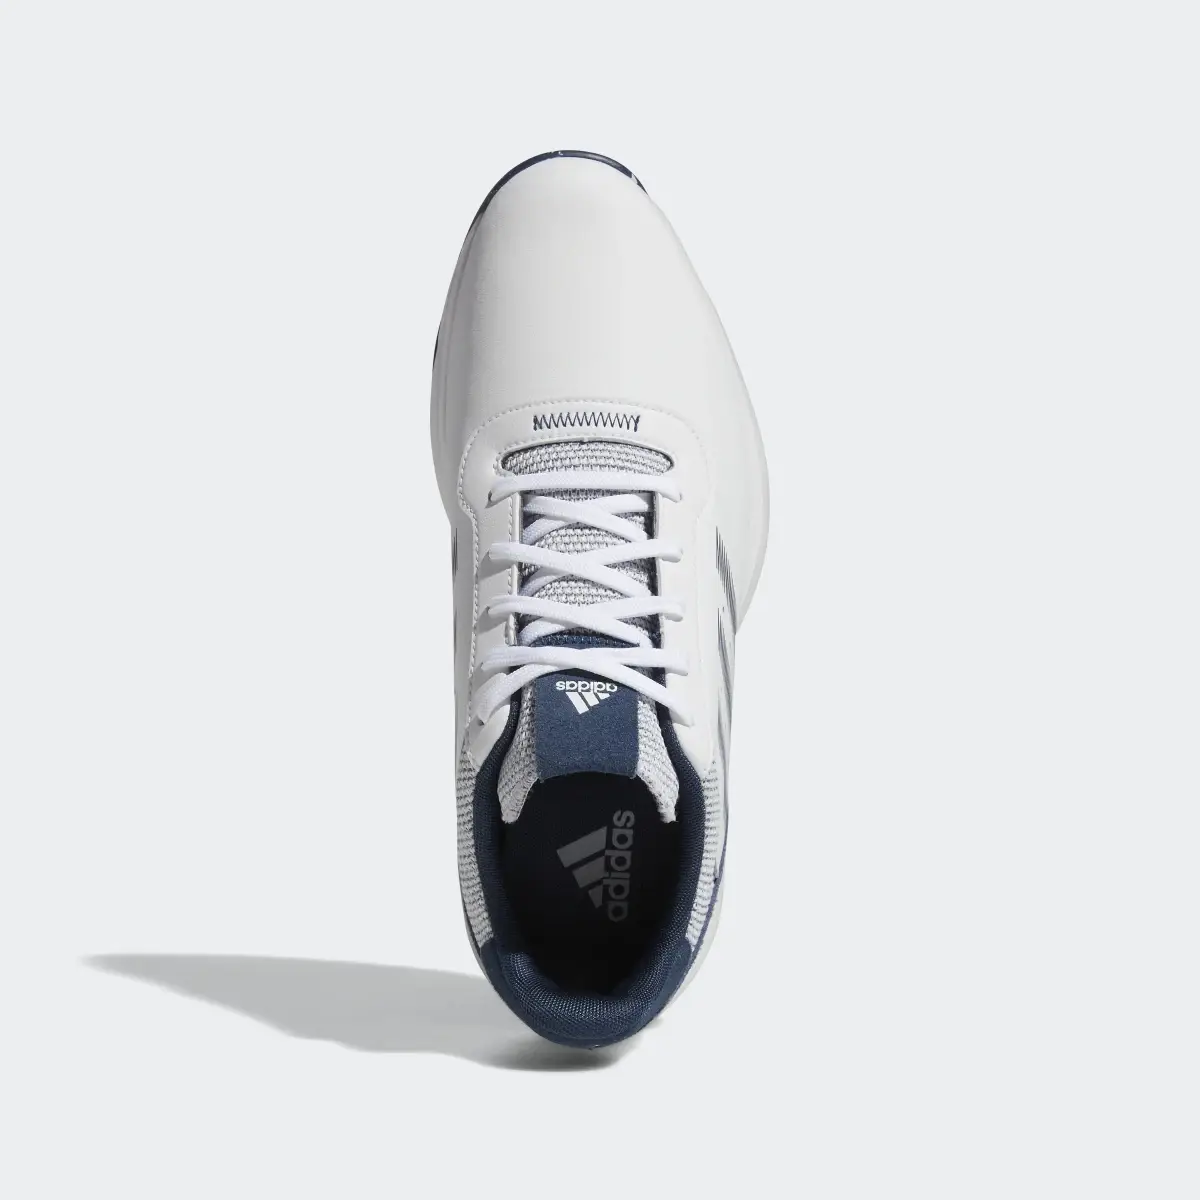 Adidas S2G Spikeless Leather Golf Shoes. 3